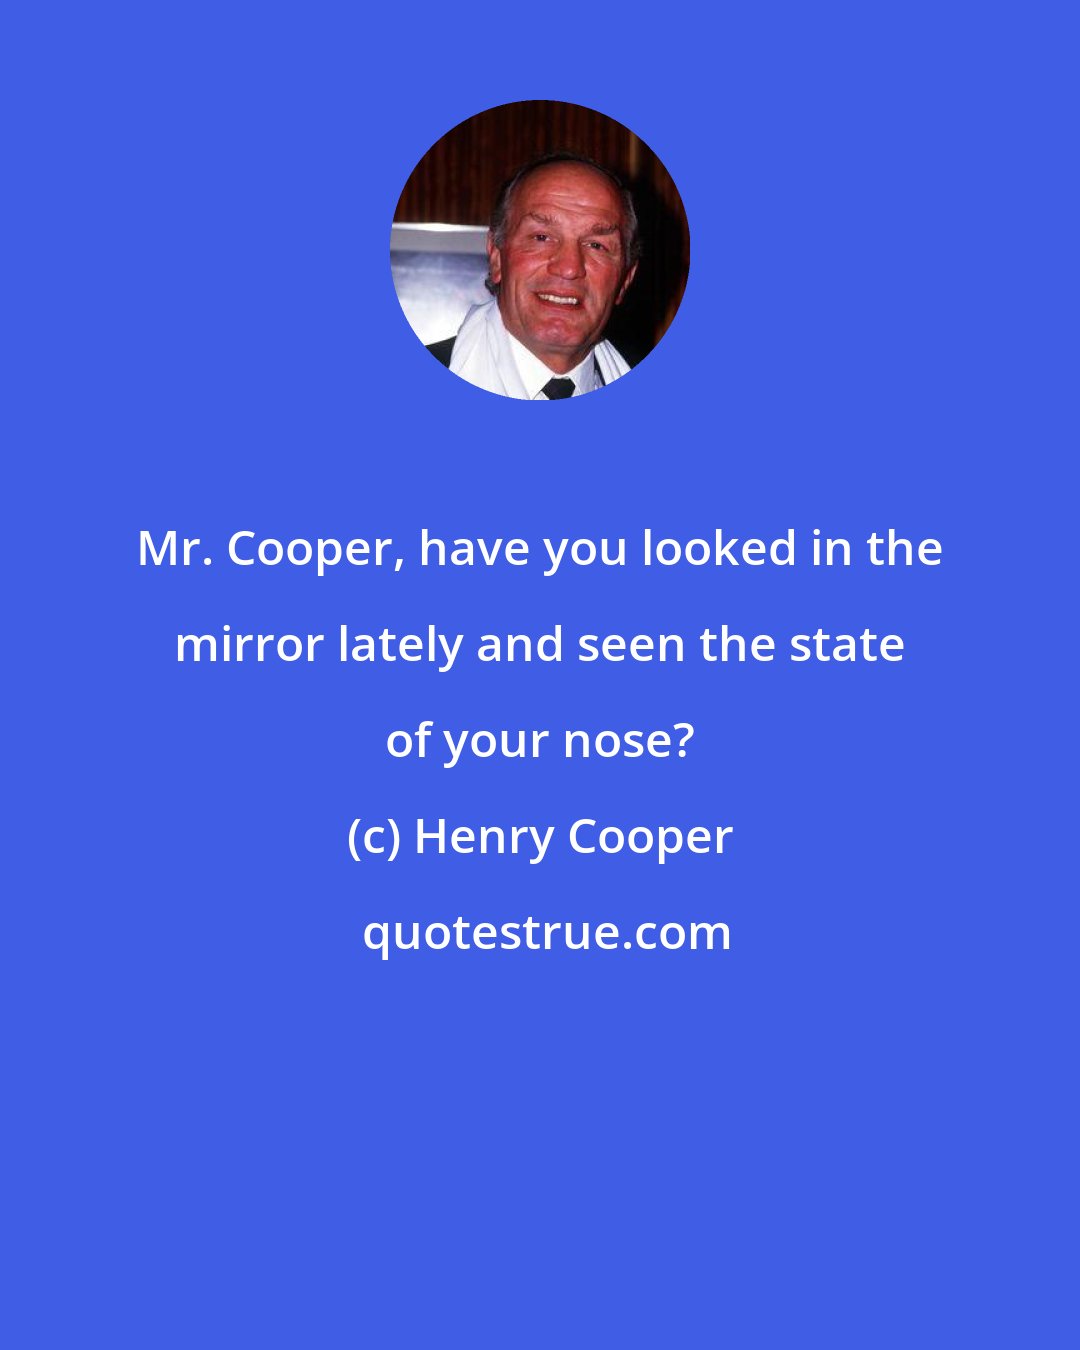 Henry Cooper: Mr. Cooper, have you looked in the mirror lately and seen the state of your nose?